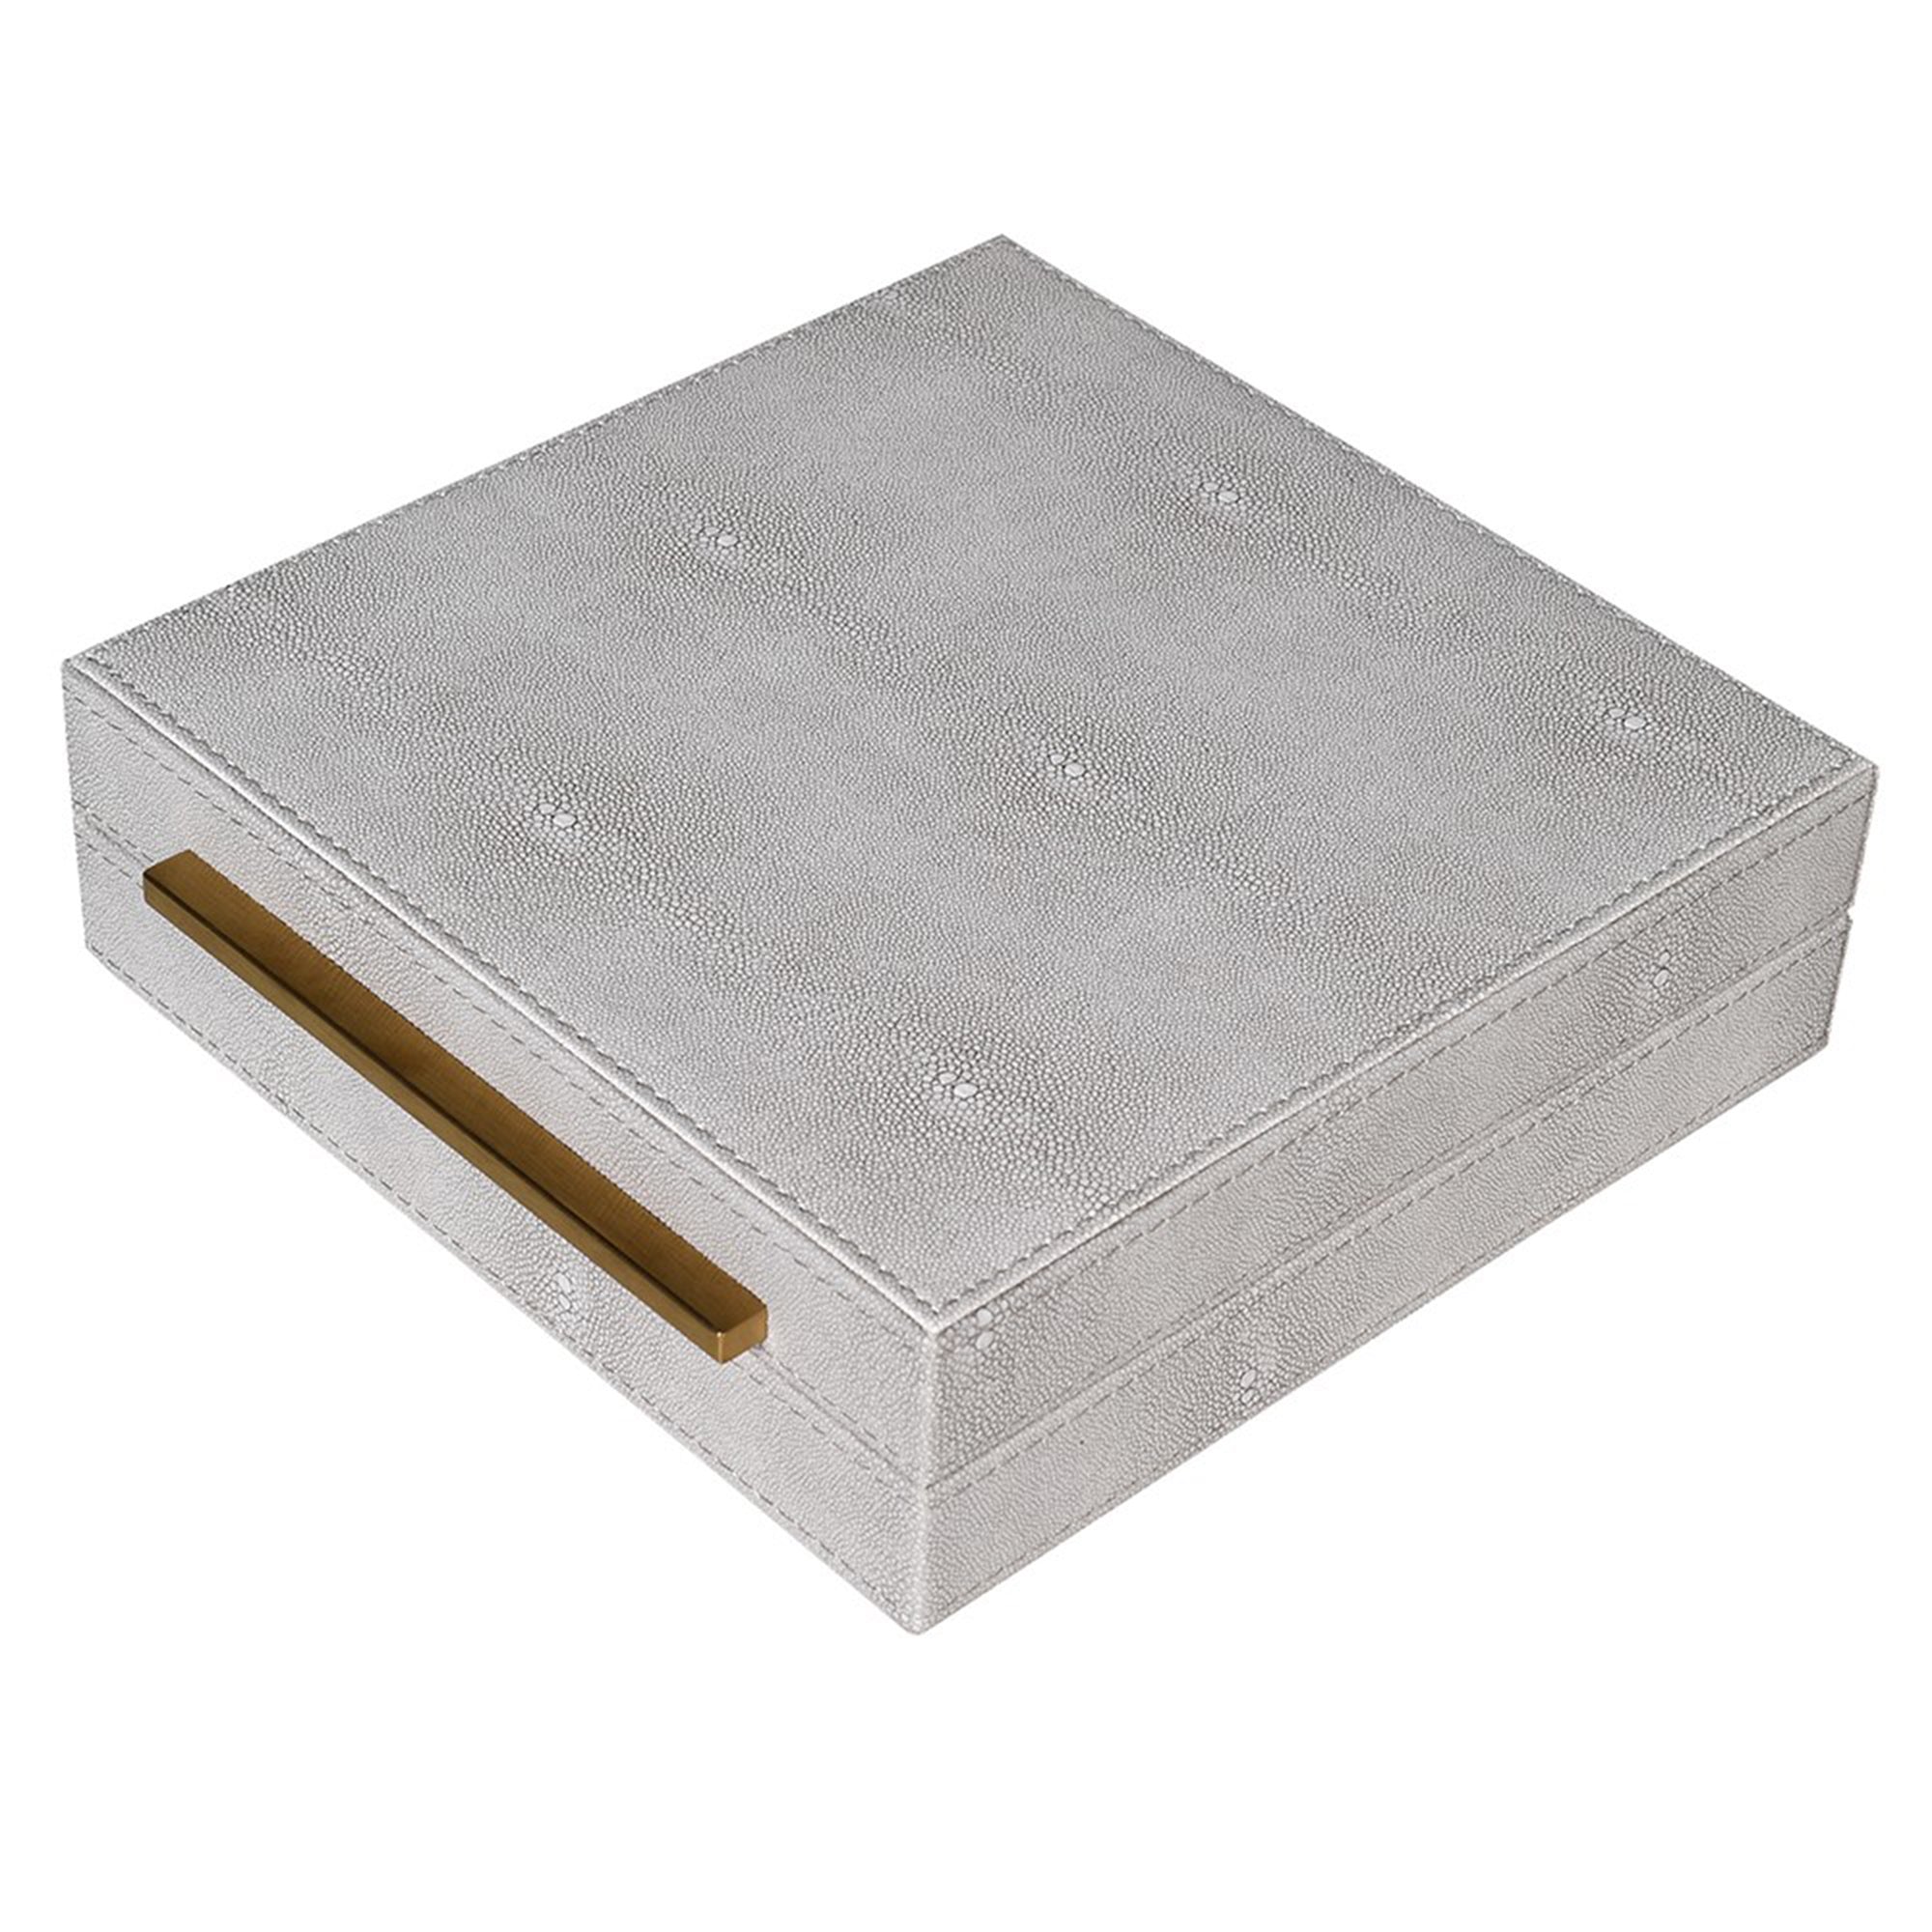 Shagreen Boxes - Set of 3